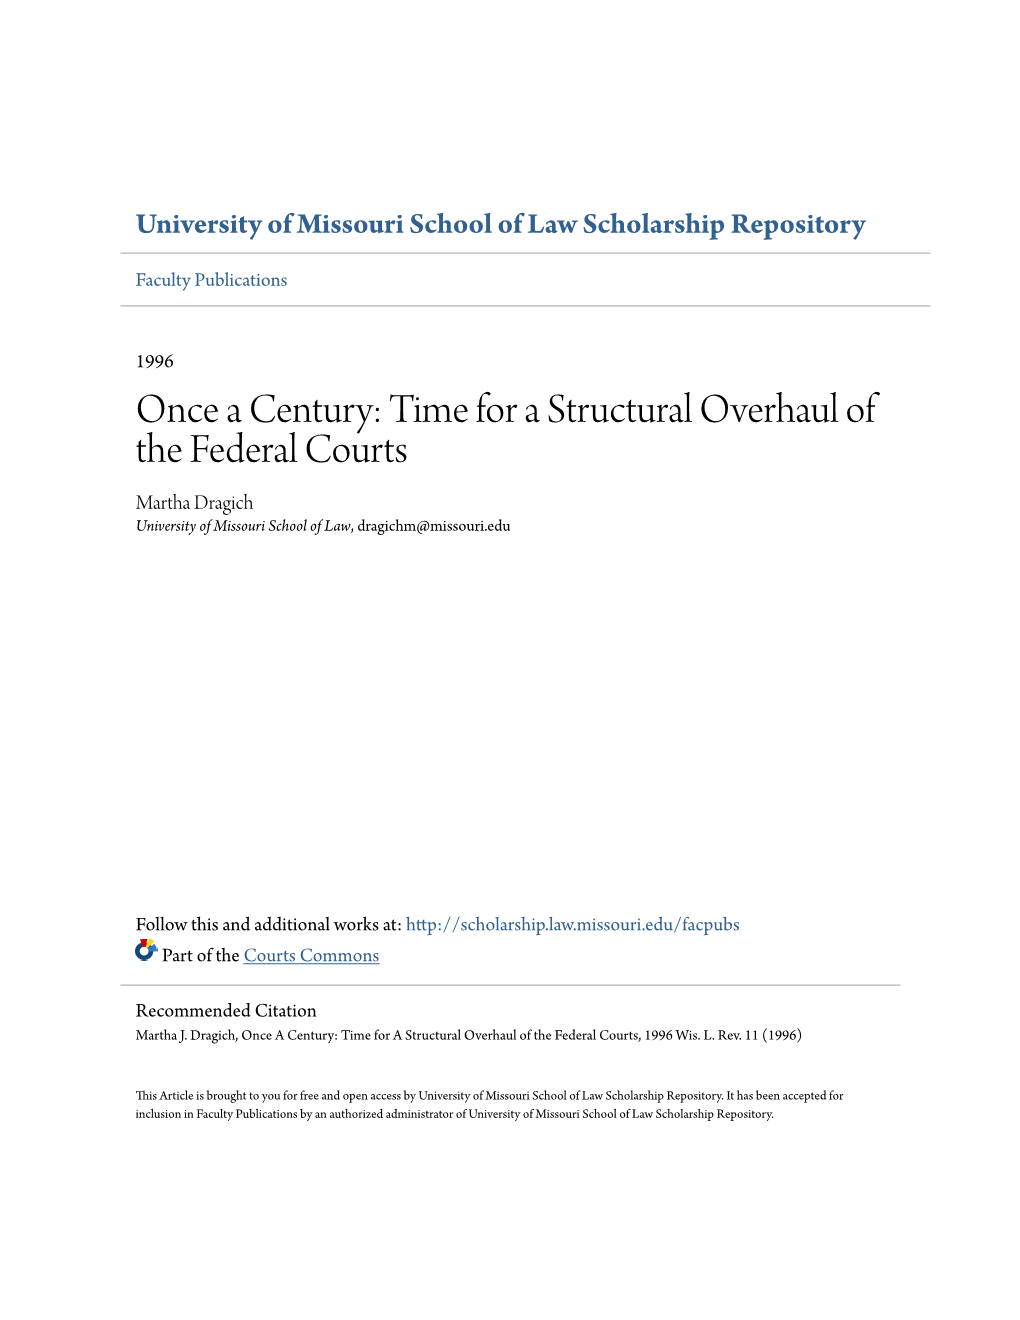 Once a Century: Time for a Structural Overhaul of the Federal Courts Martha Dragich University of Missouri School of Law, Dragichm@Missouri.Edu